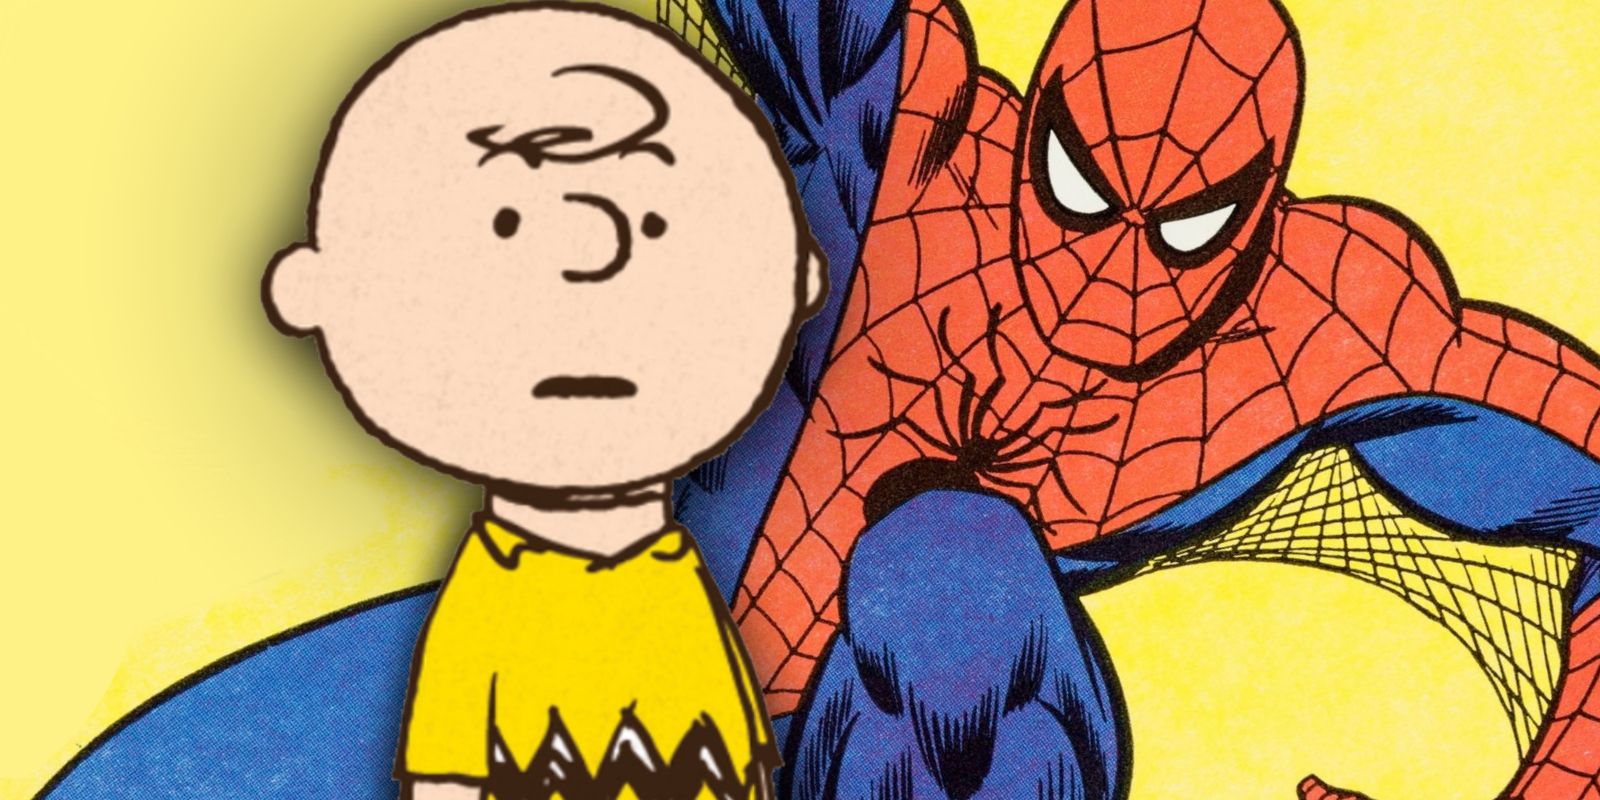 Spider-Man once saved Charlie Brown from Lucy.